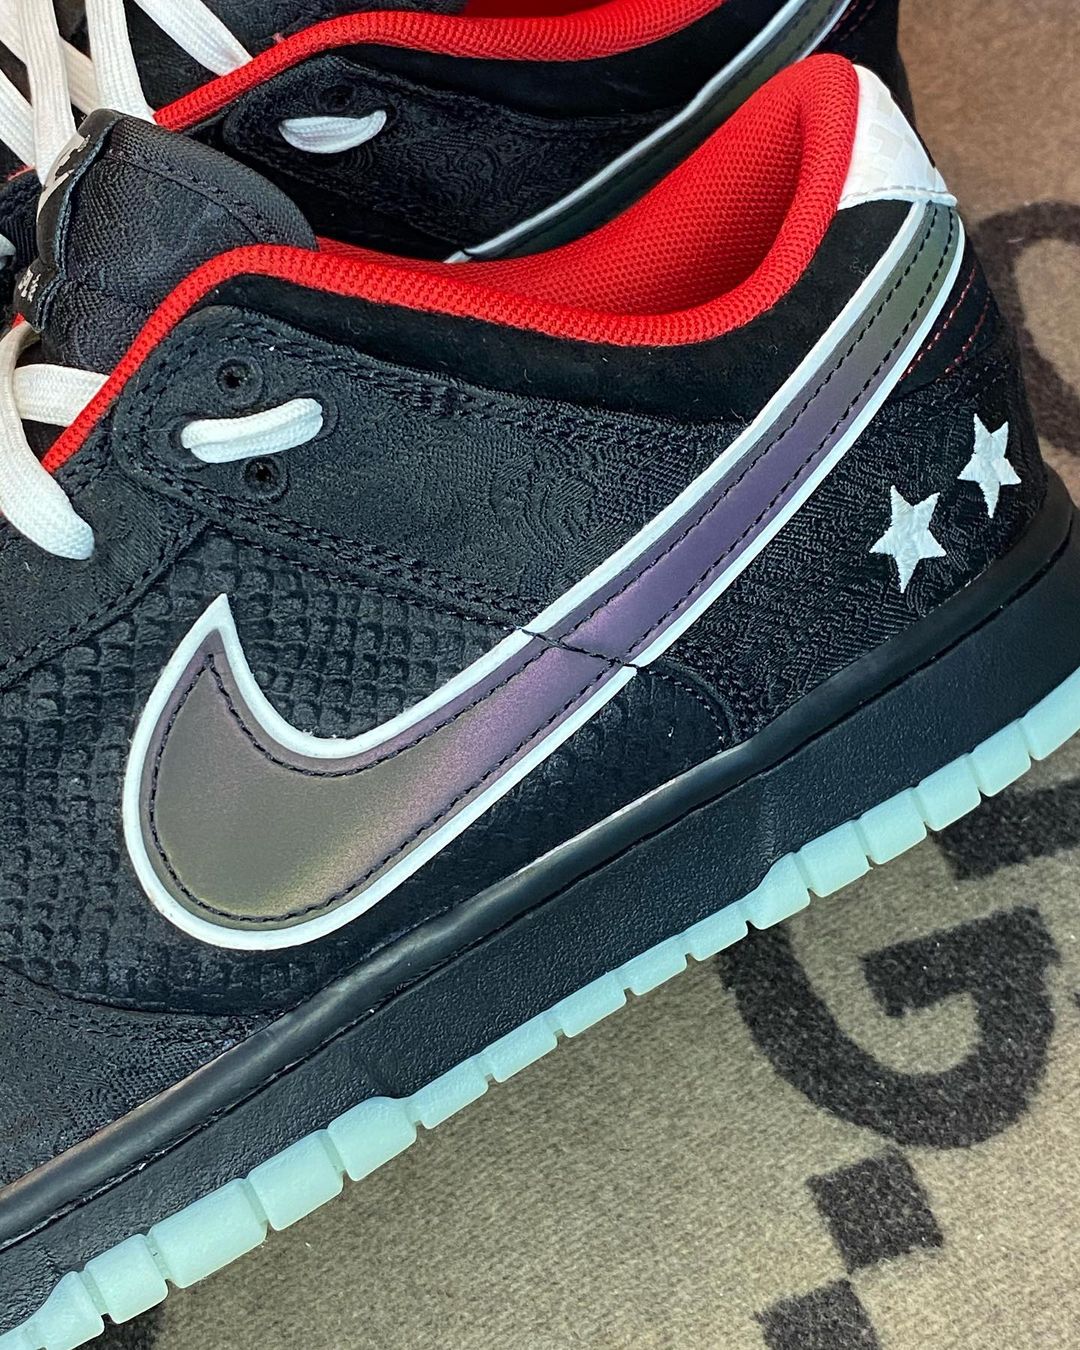 This Nike Dunk Low Its Cue from eSports